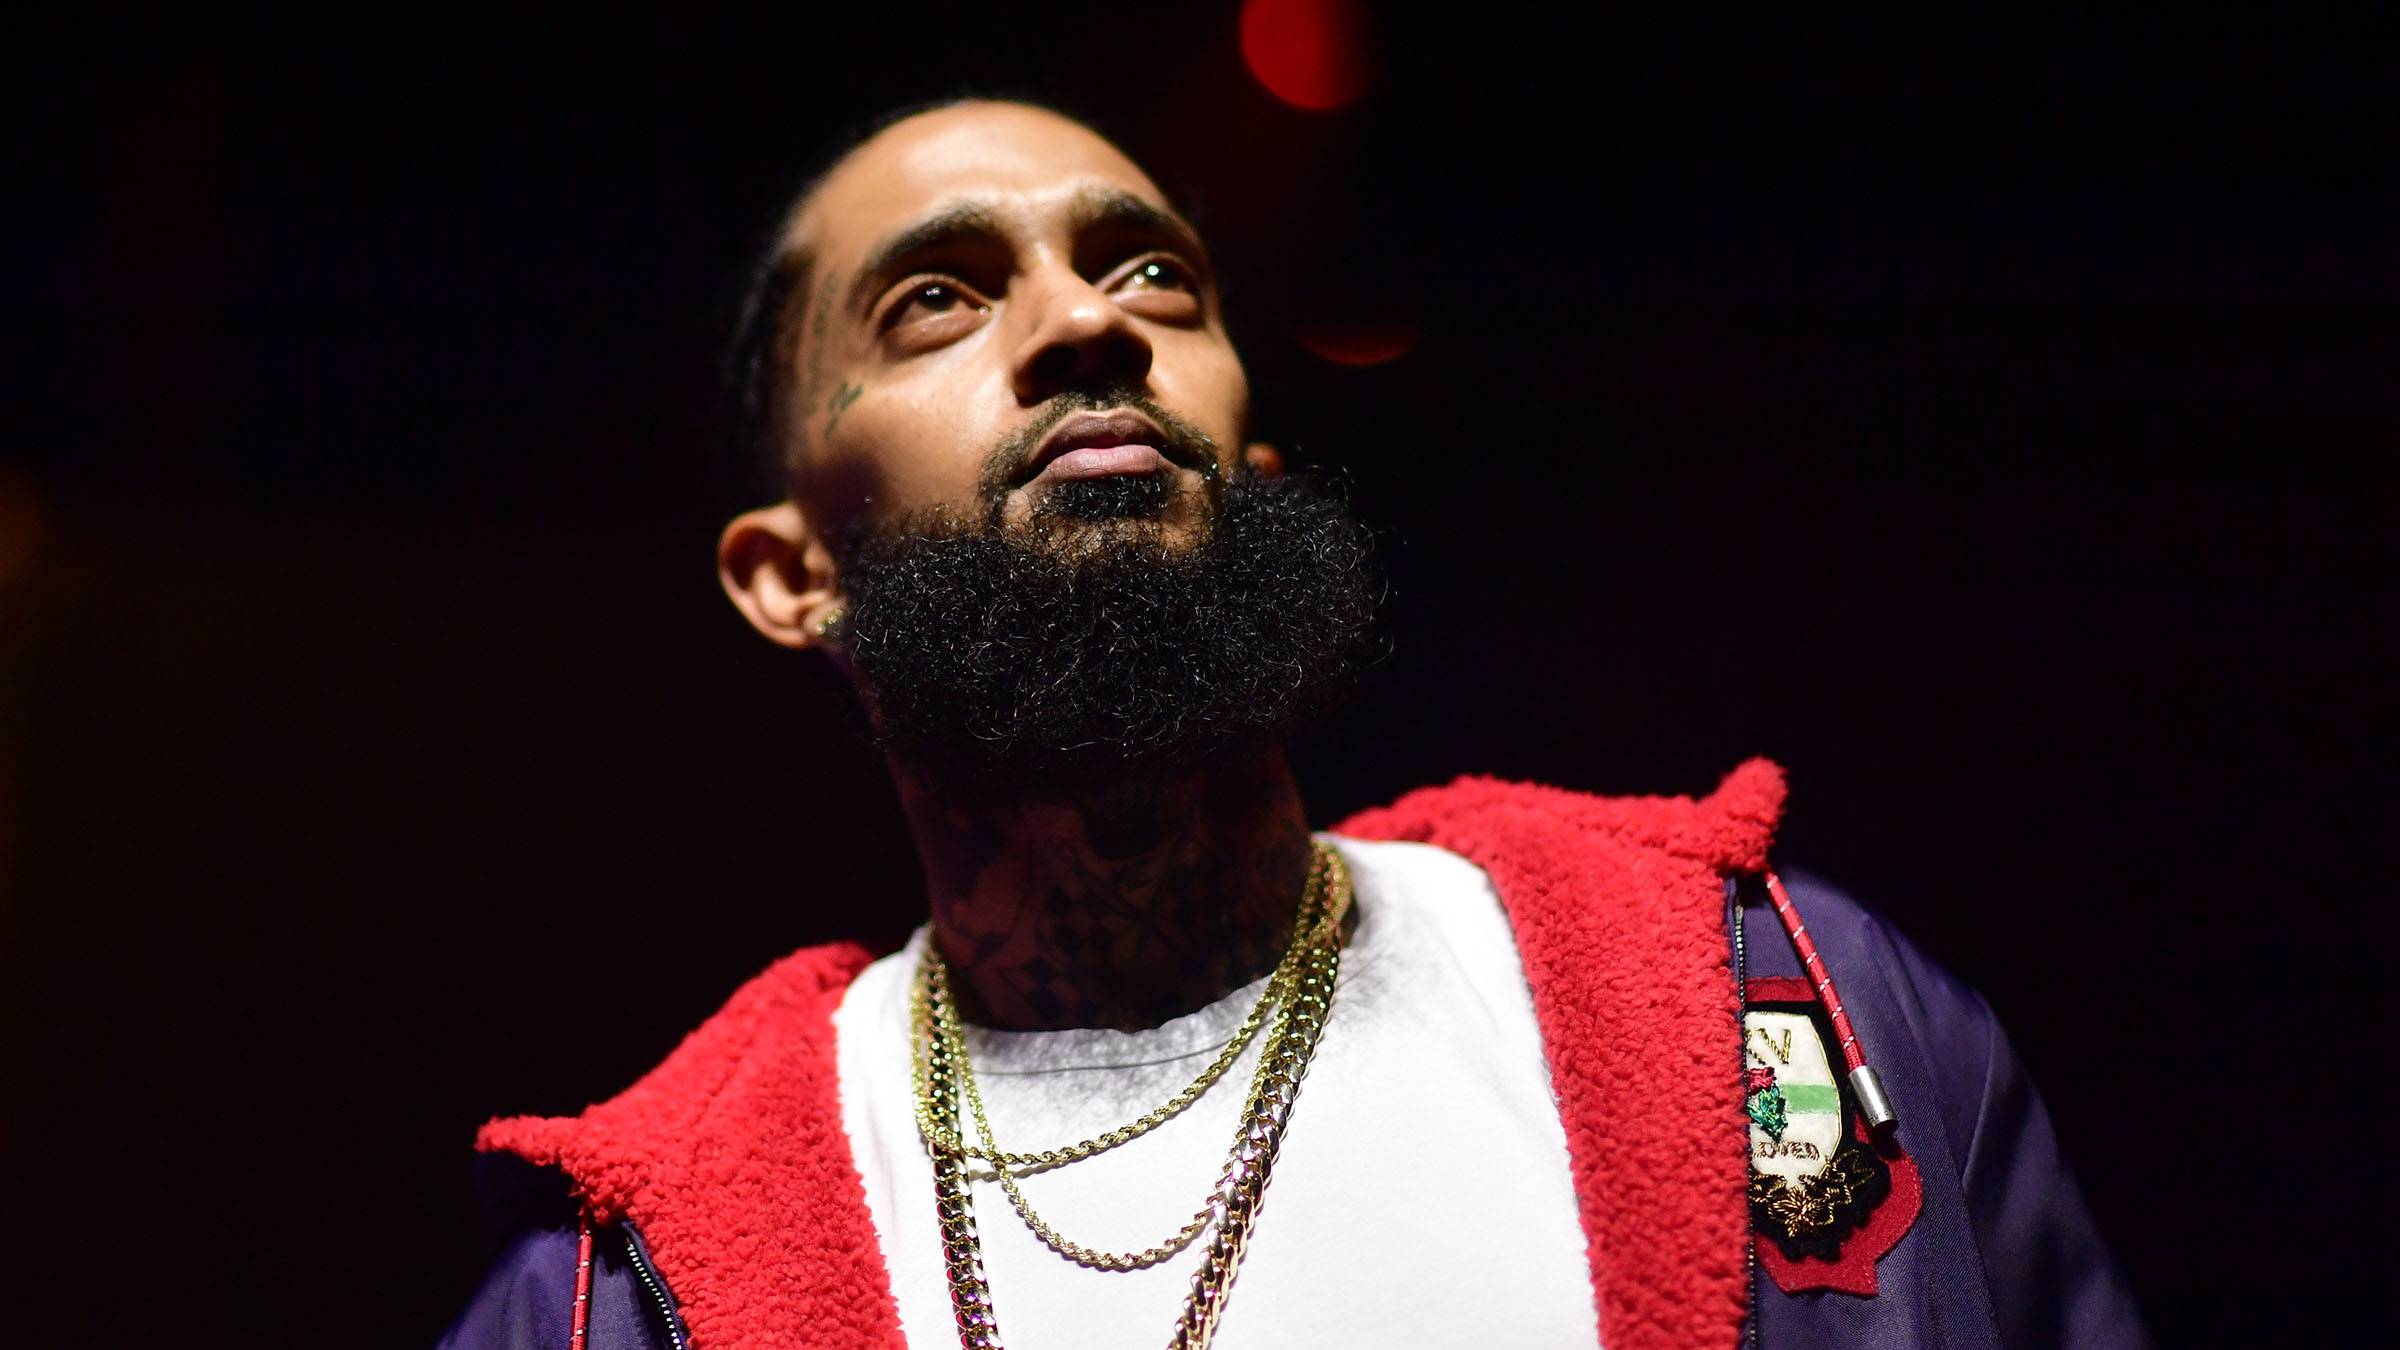 LeBron James and Maverick Carter Want to Tell Nipsey Hussle's Story